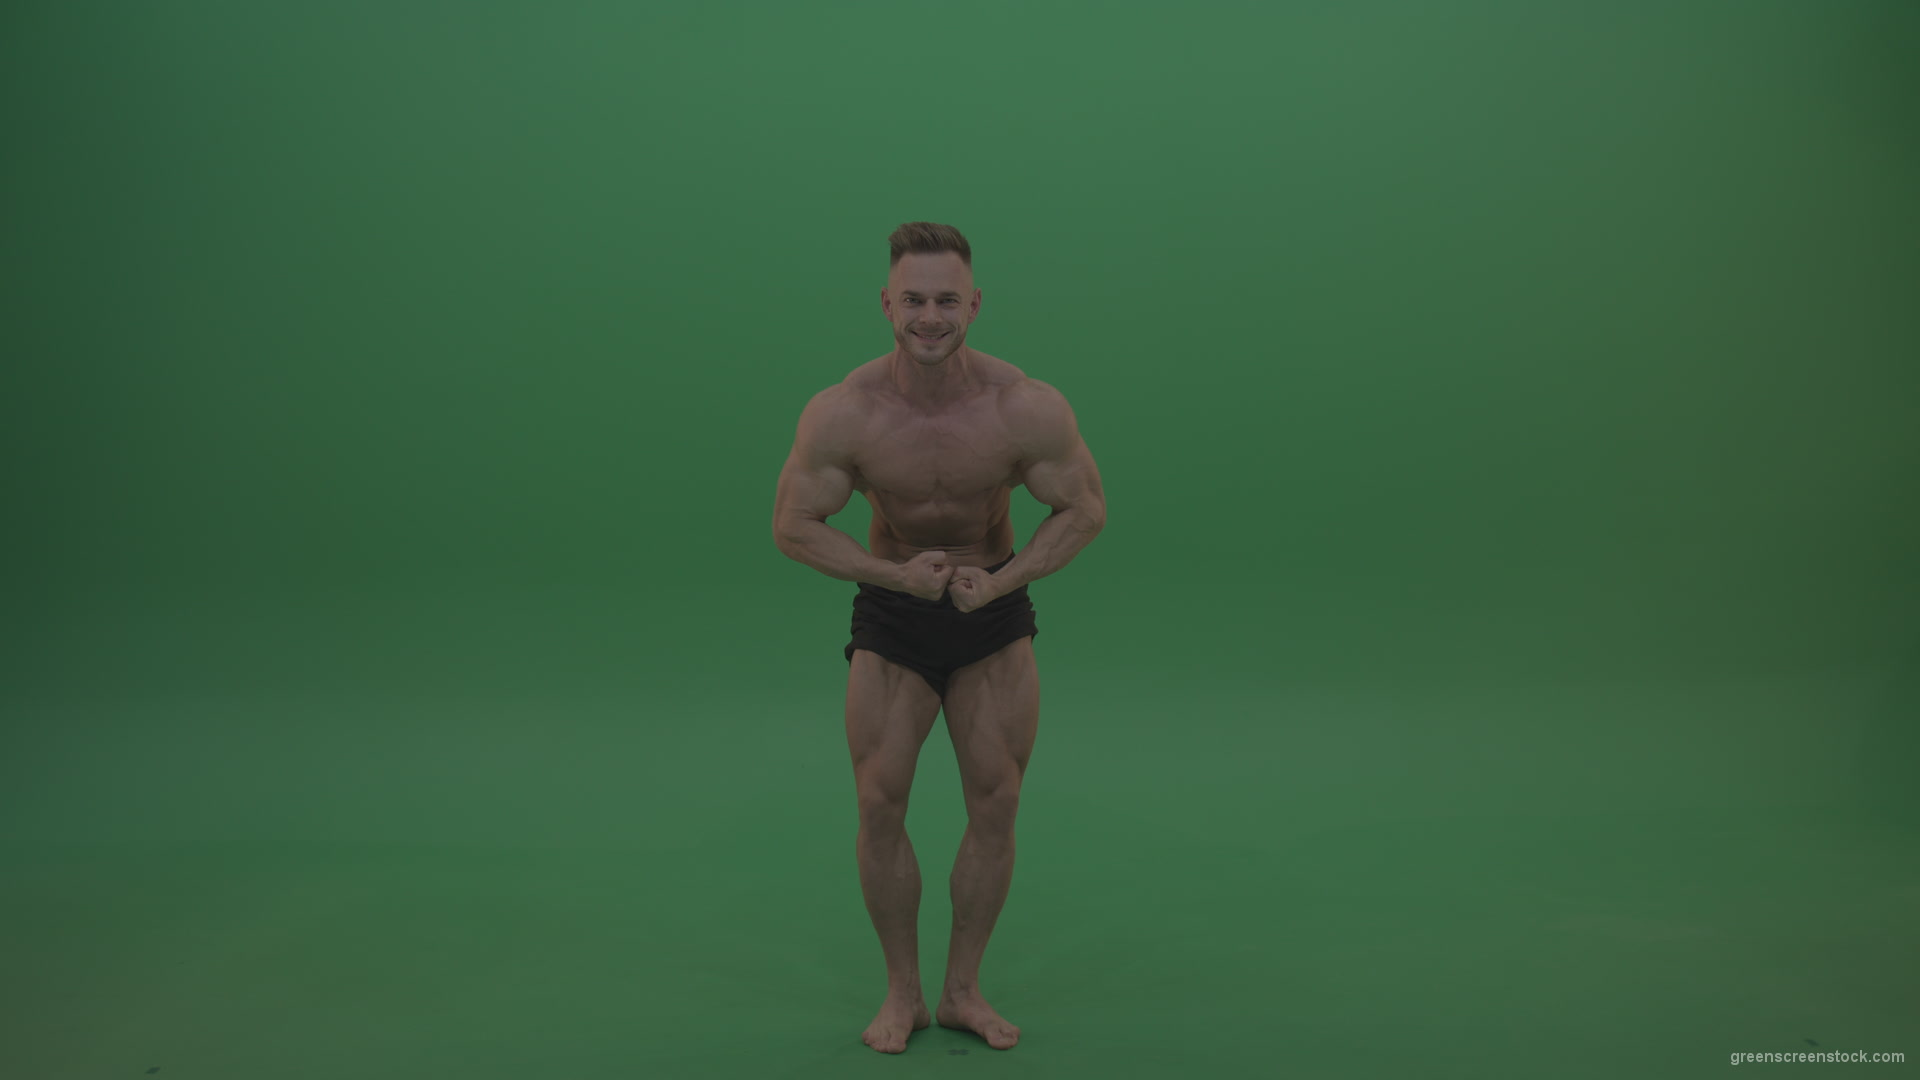 Young_Sportsman_Showing_Front_Double_Biceps_And_Thigh_Muscles_Bodybuilding_Positions_On_Gren_Screen_Wall_Background_009 Green Screen Stock